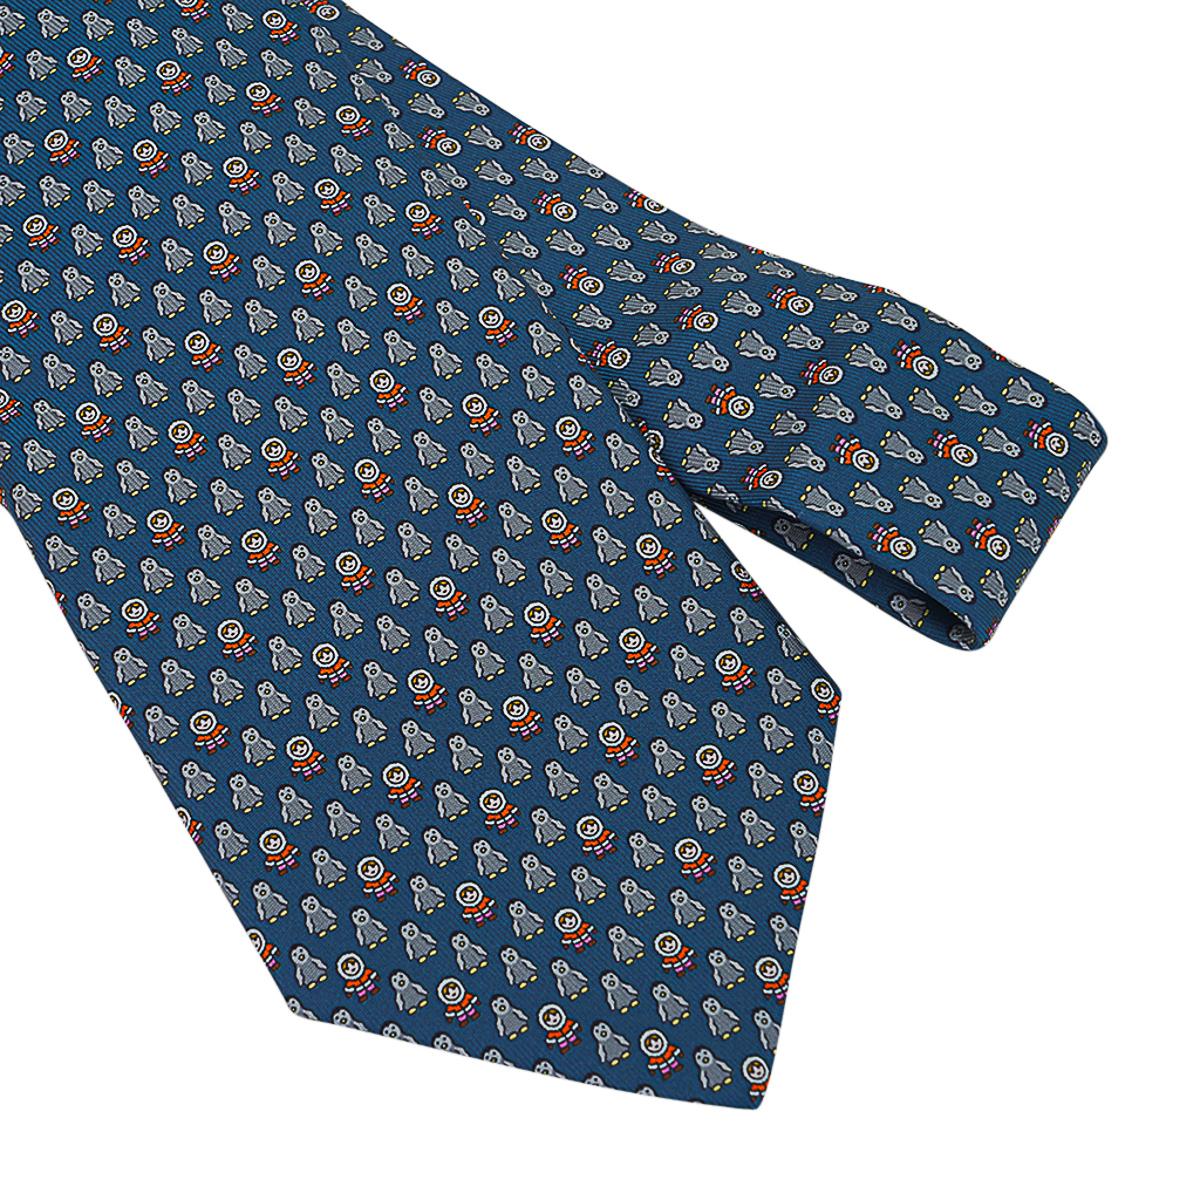 Mightychic offers an Hermes Pingloo Twillbi silk tie featured in Vert Pin, Gis and Orange.
Charming Inuit and Penguins adorn the front.
The inner has small foot steps along the length.
The interior hides an igloo!
This delightful piece is a perfect